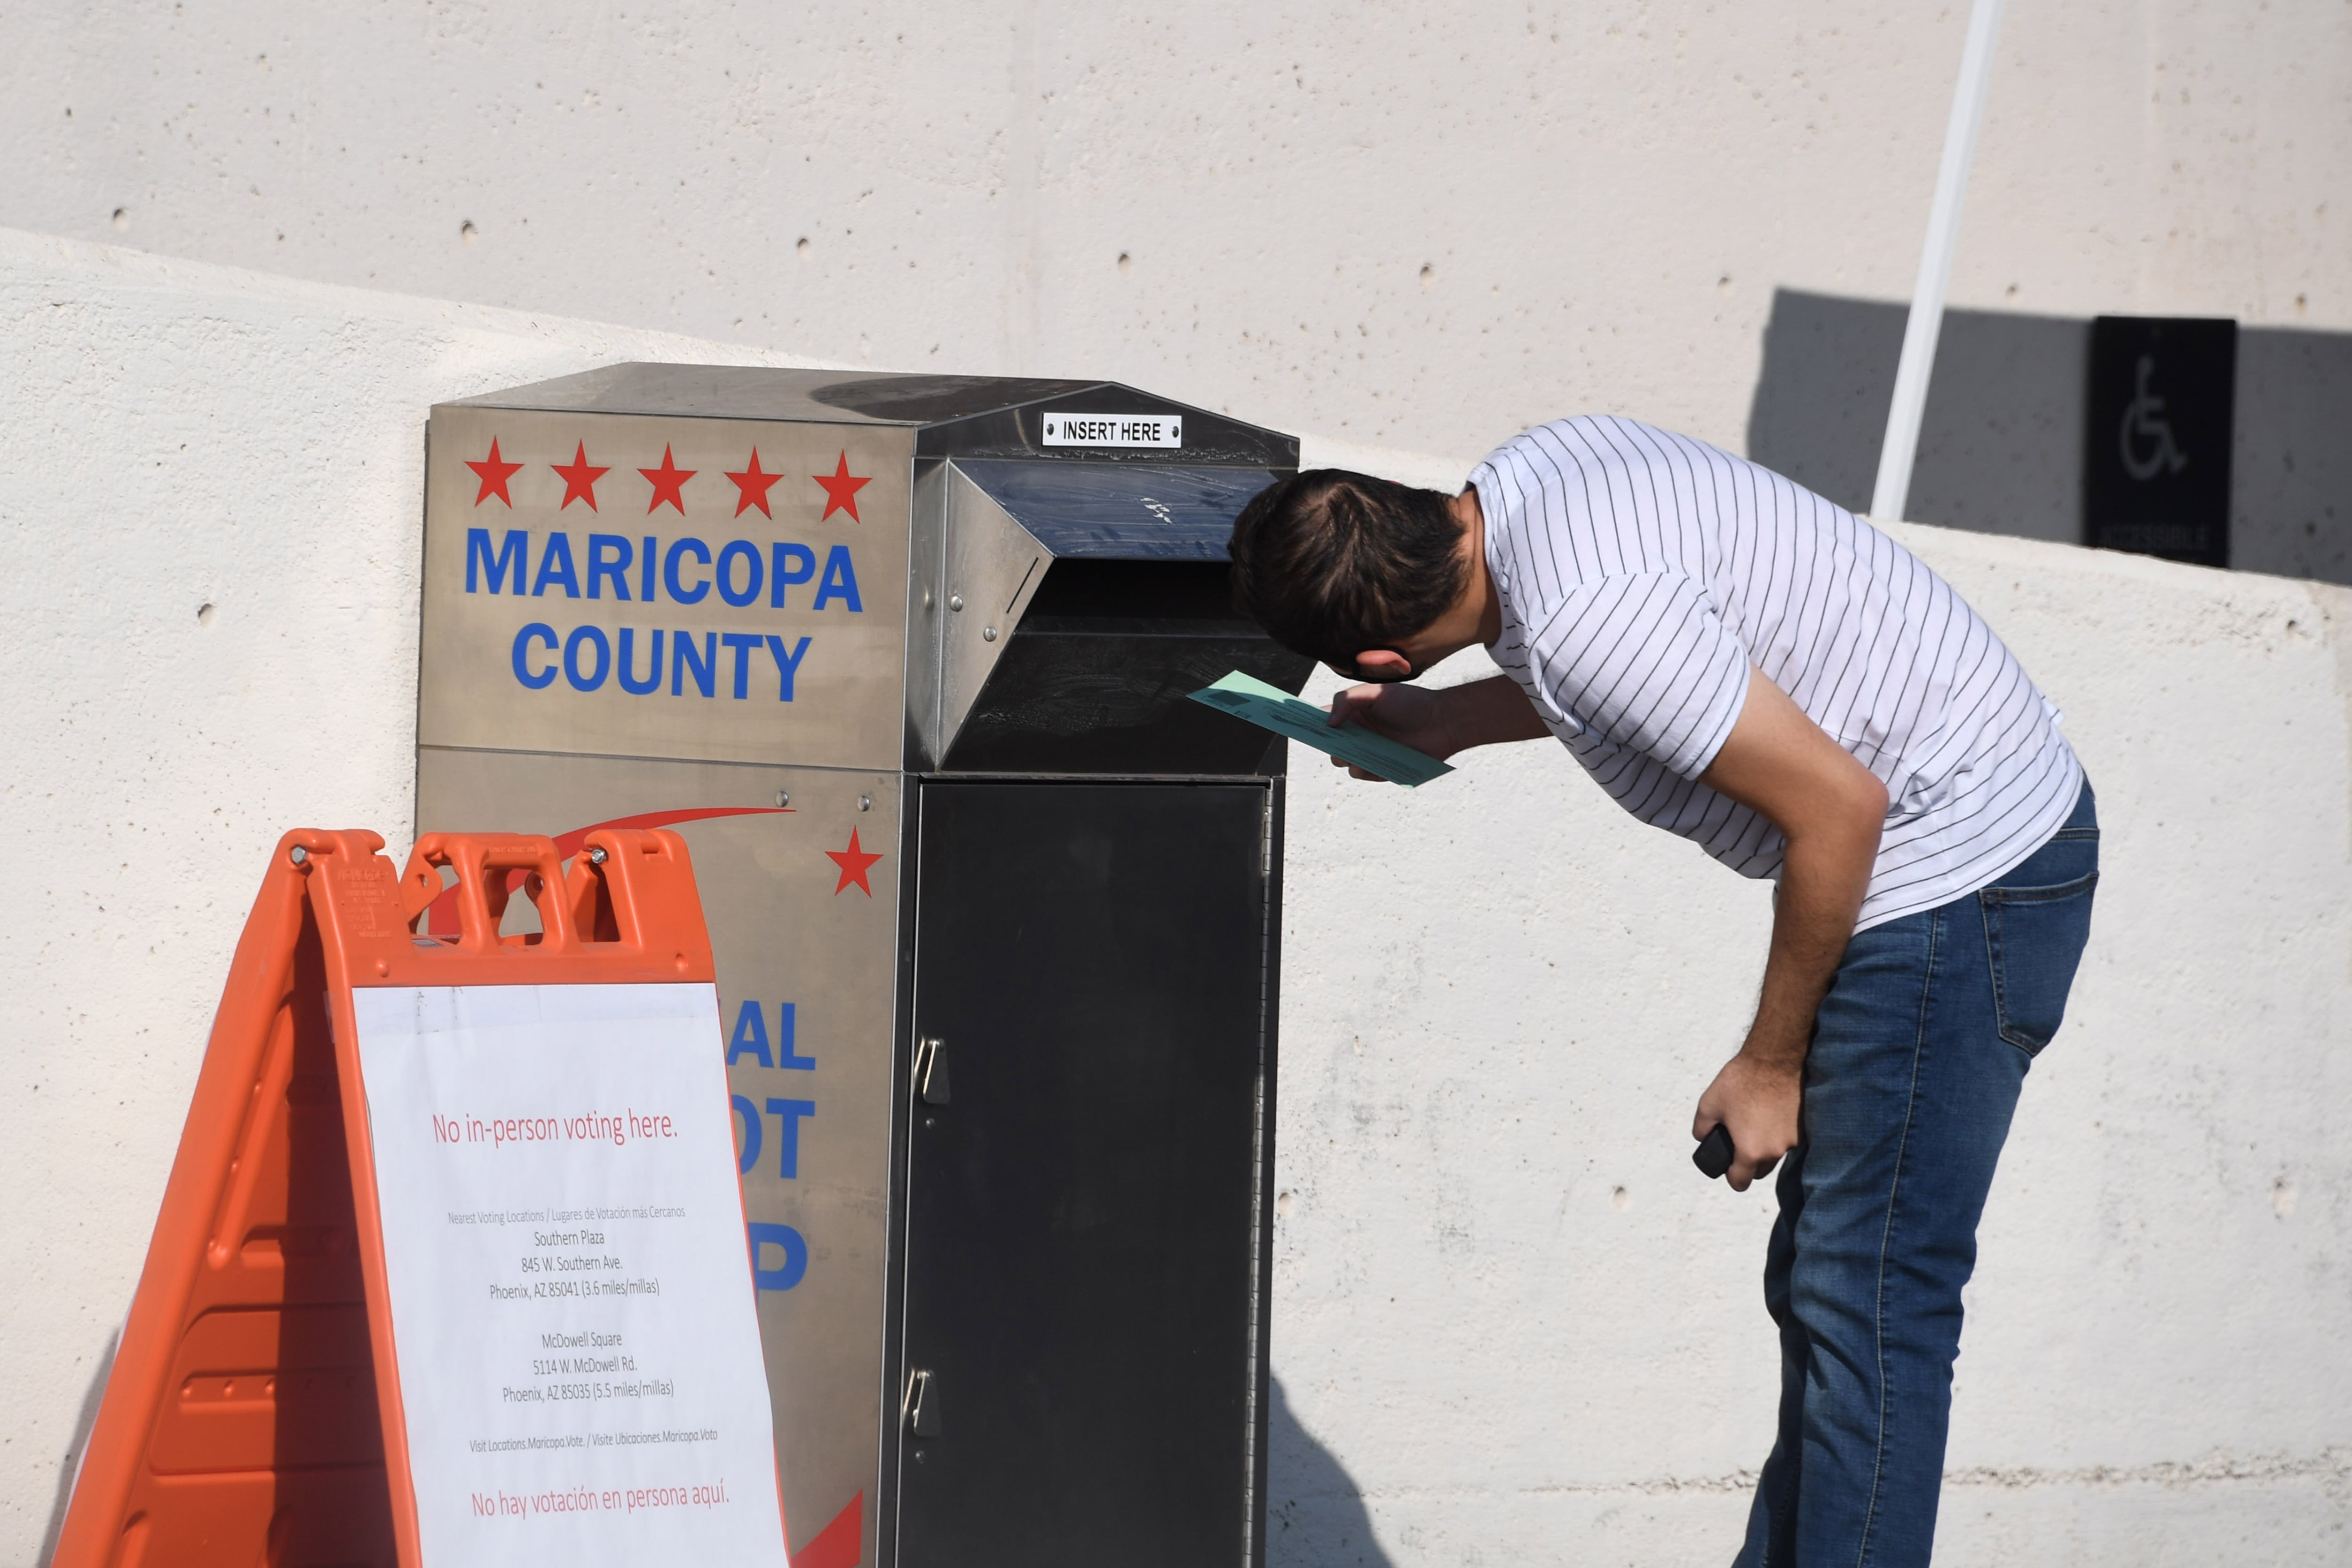 A man bends down to look into the opening of a silver drop box on a sidewalk